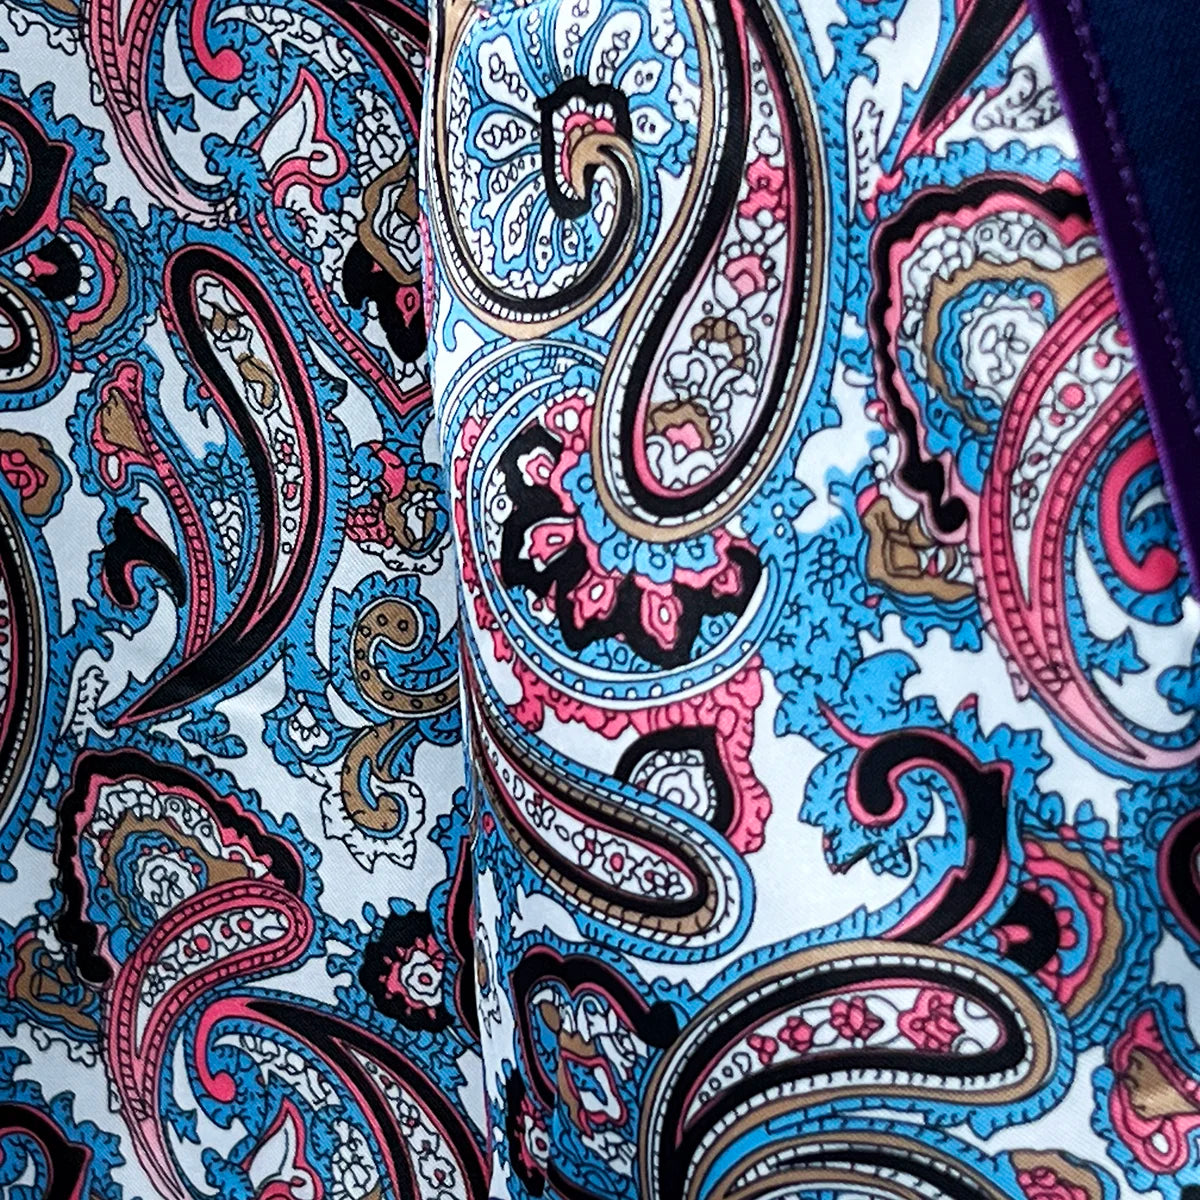 Image showing the flash linings of the suit in the vibrant multi-color fancy paisley pattern.